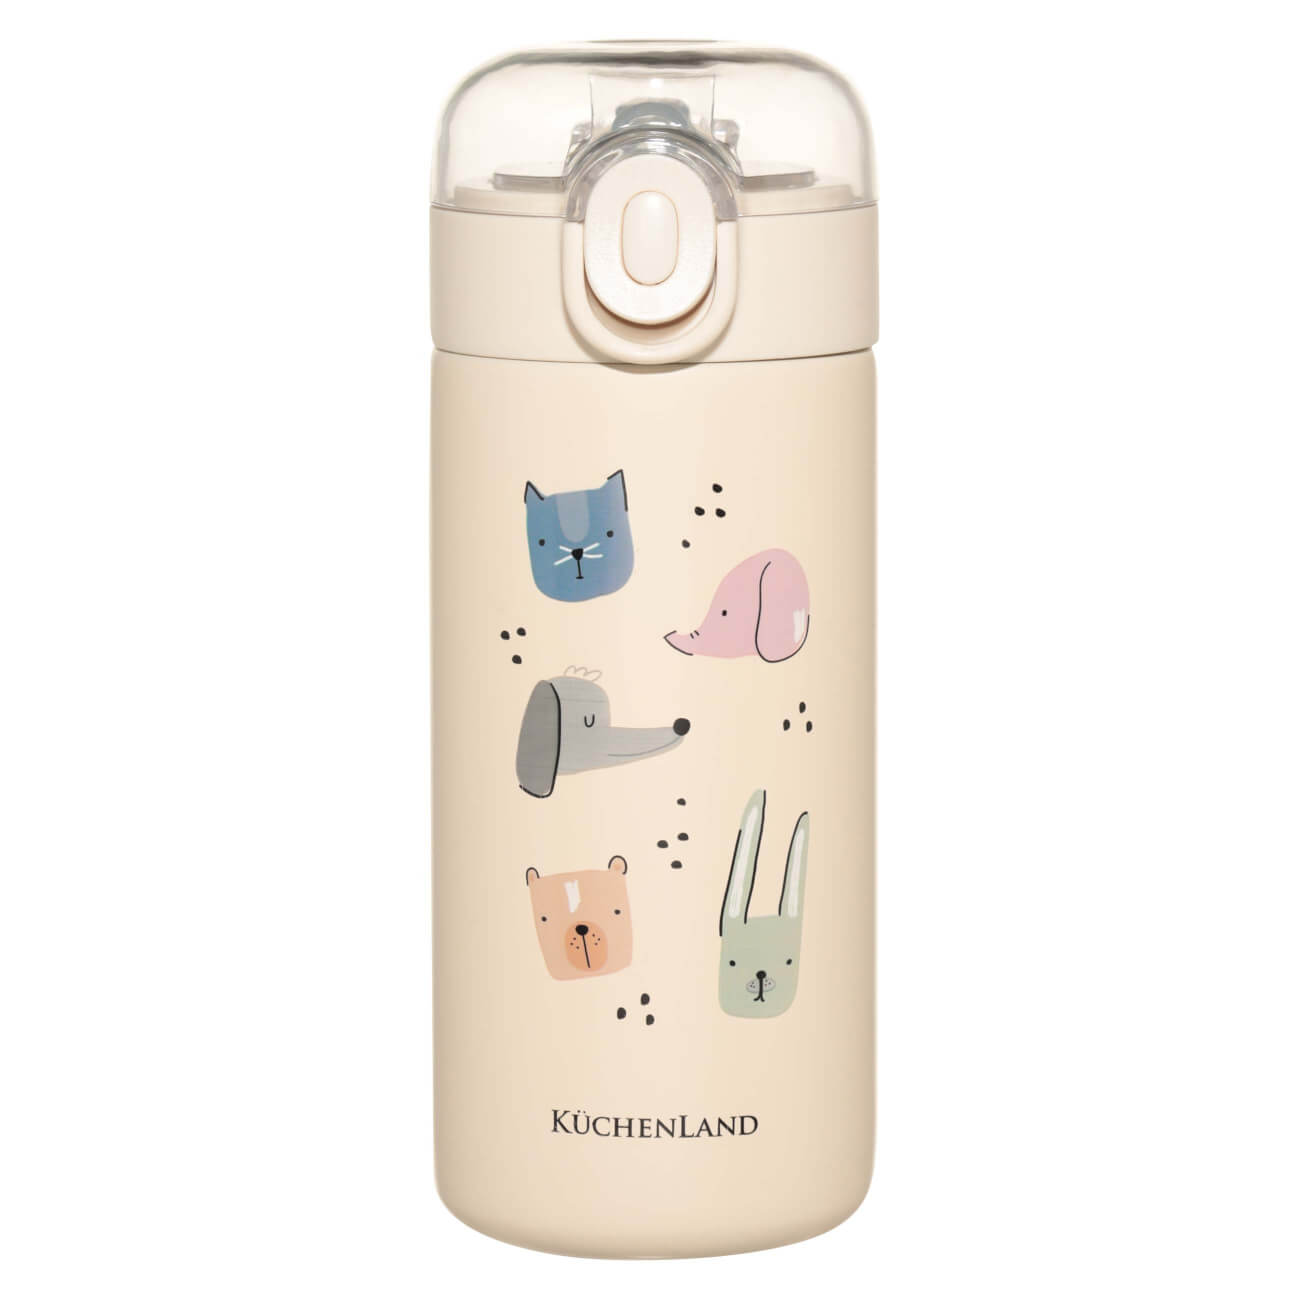 Children's thermos flask, 320 ml, with tube, steel / plastic, beige, Animals, Cute vessel